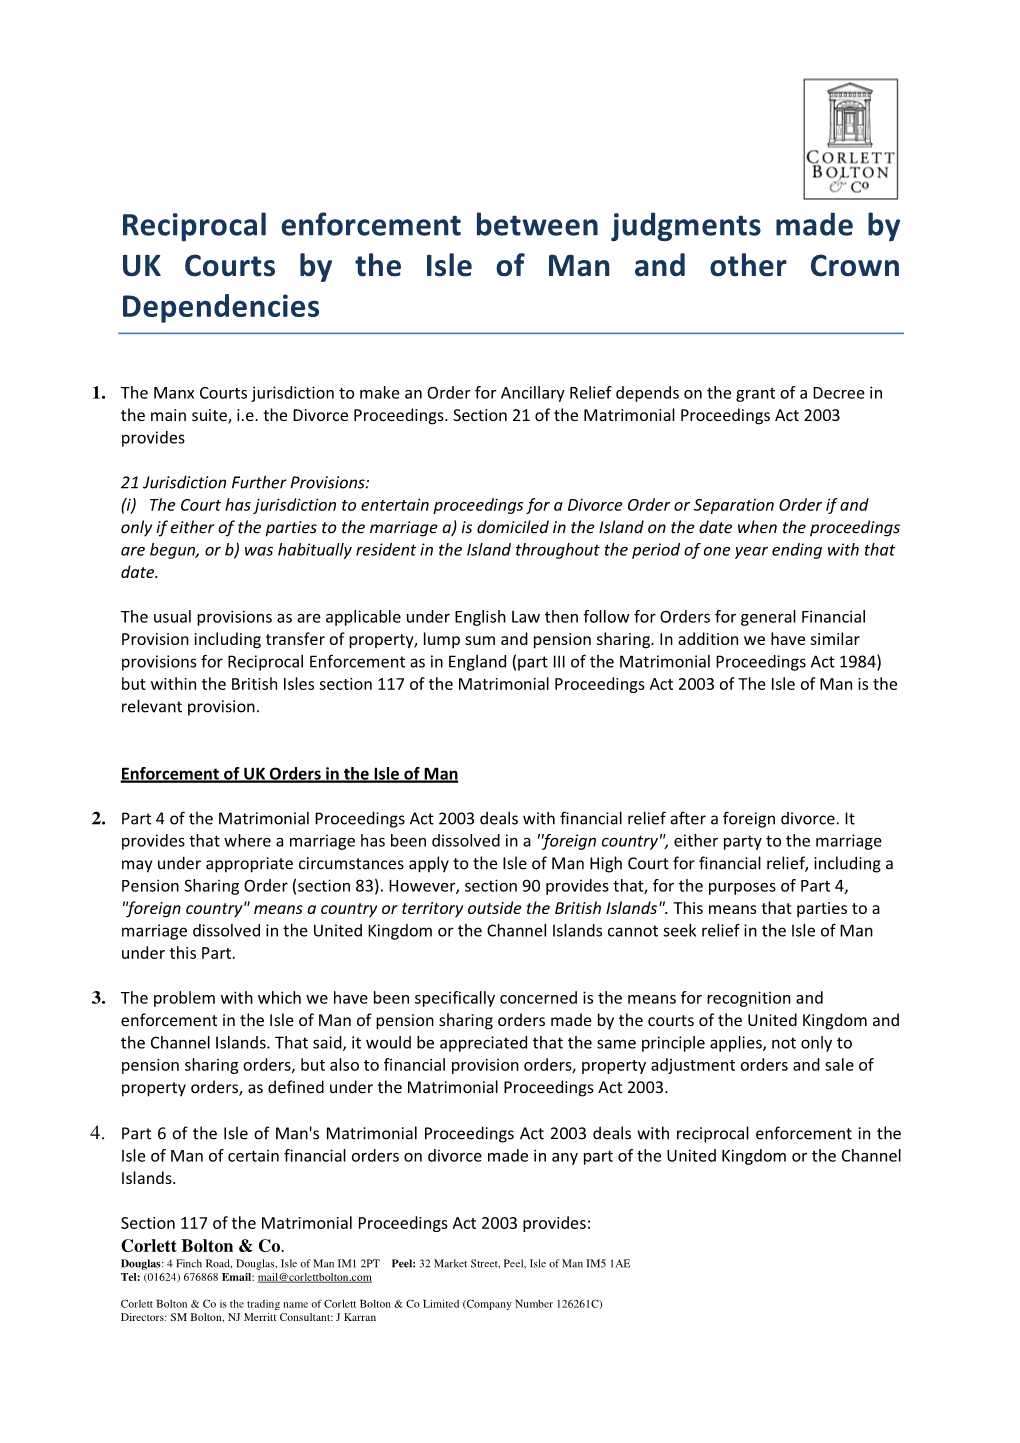 Reciprocal Enforcement Between Judgments Made by UK Courts by the Isle of Man and Other Crown Dependencies